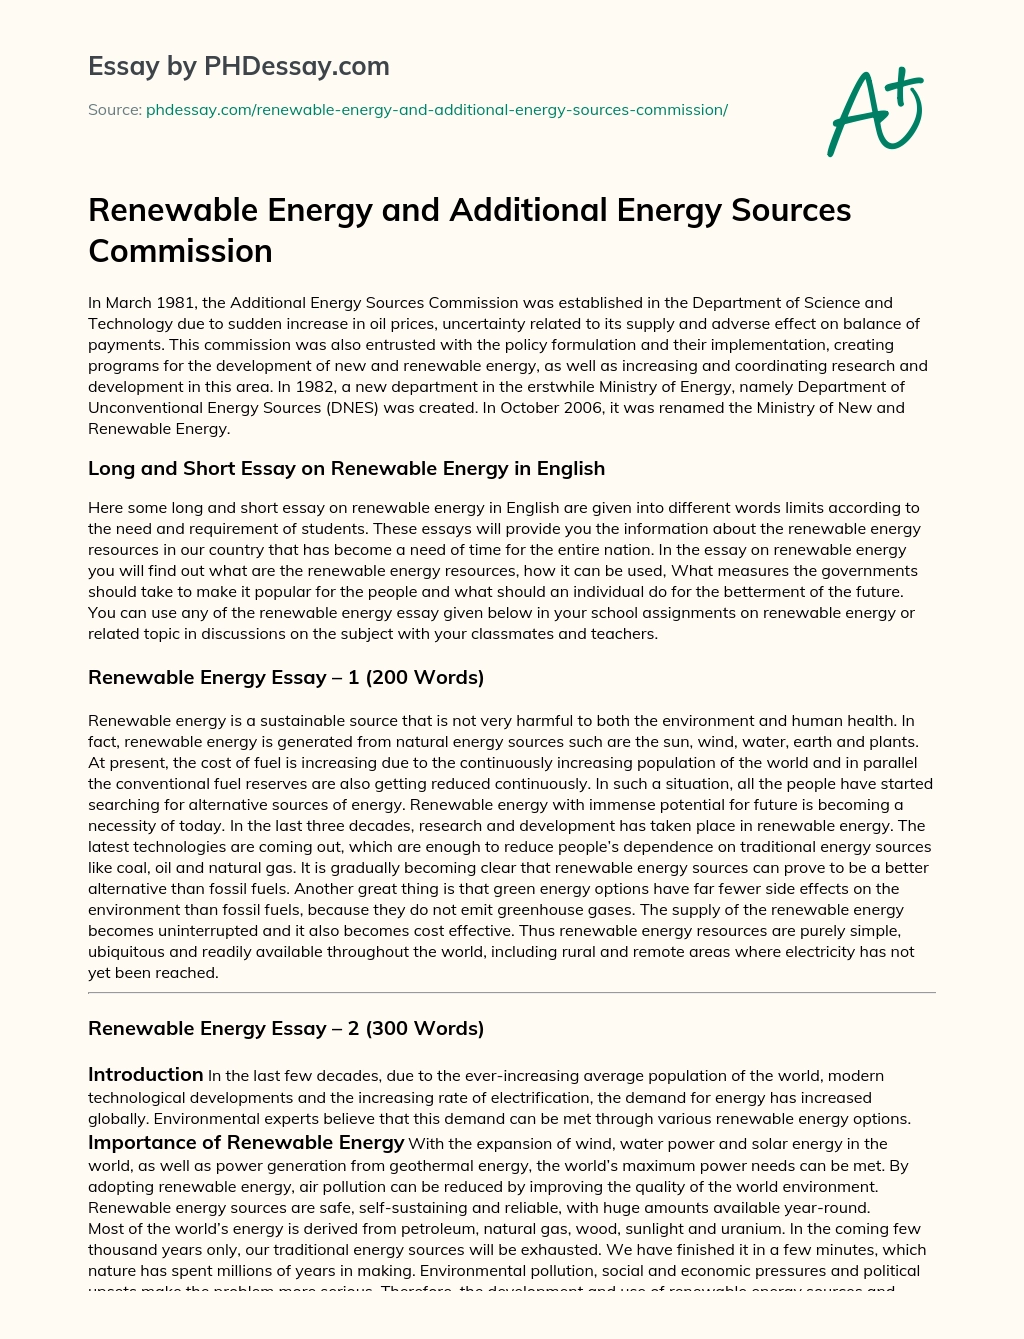 Renewable Energy and Additional Energy Sources Commission essay